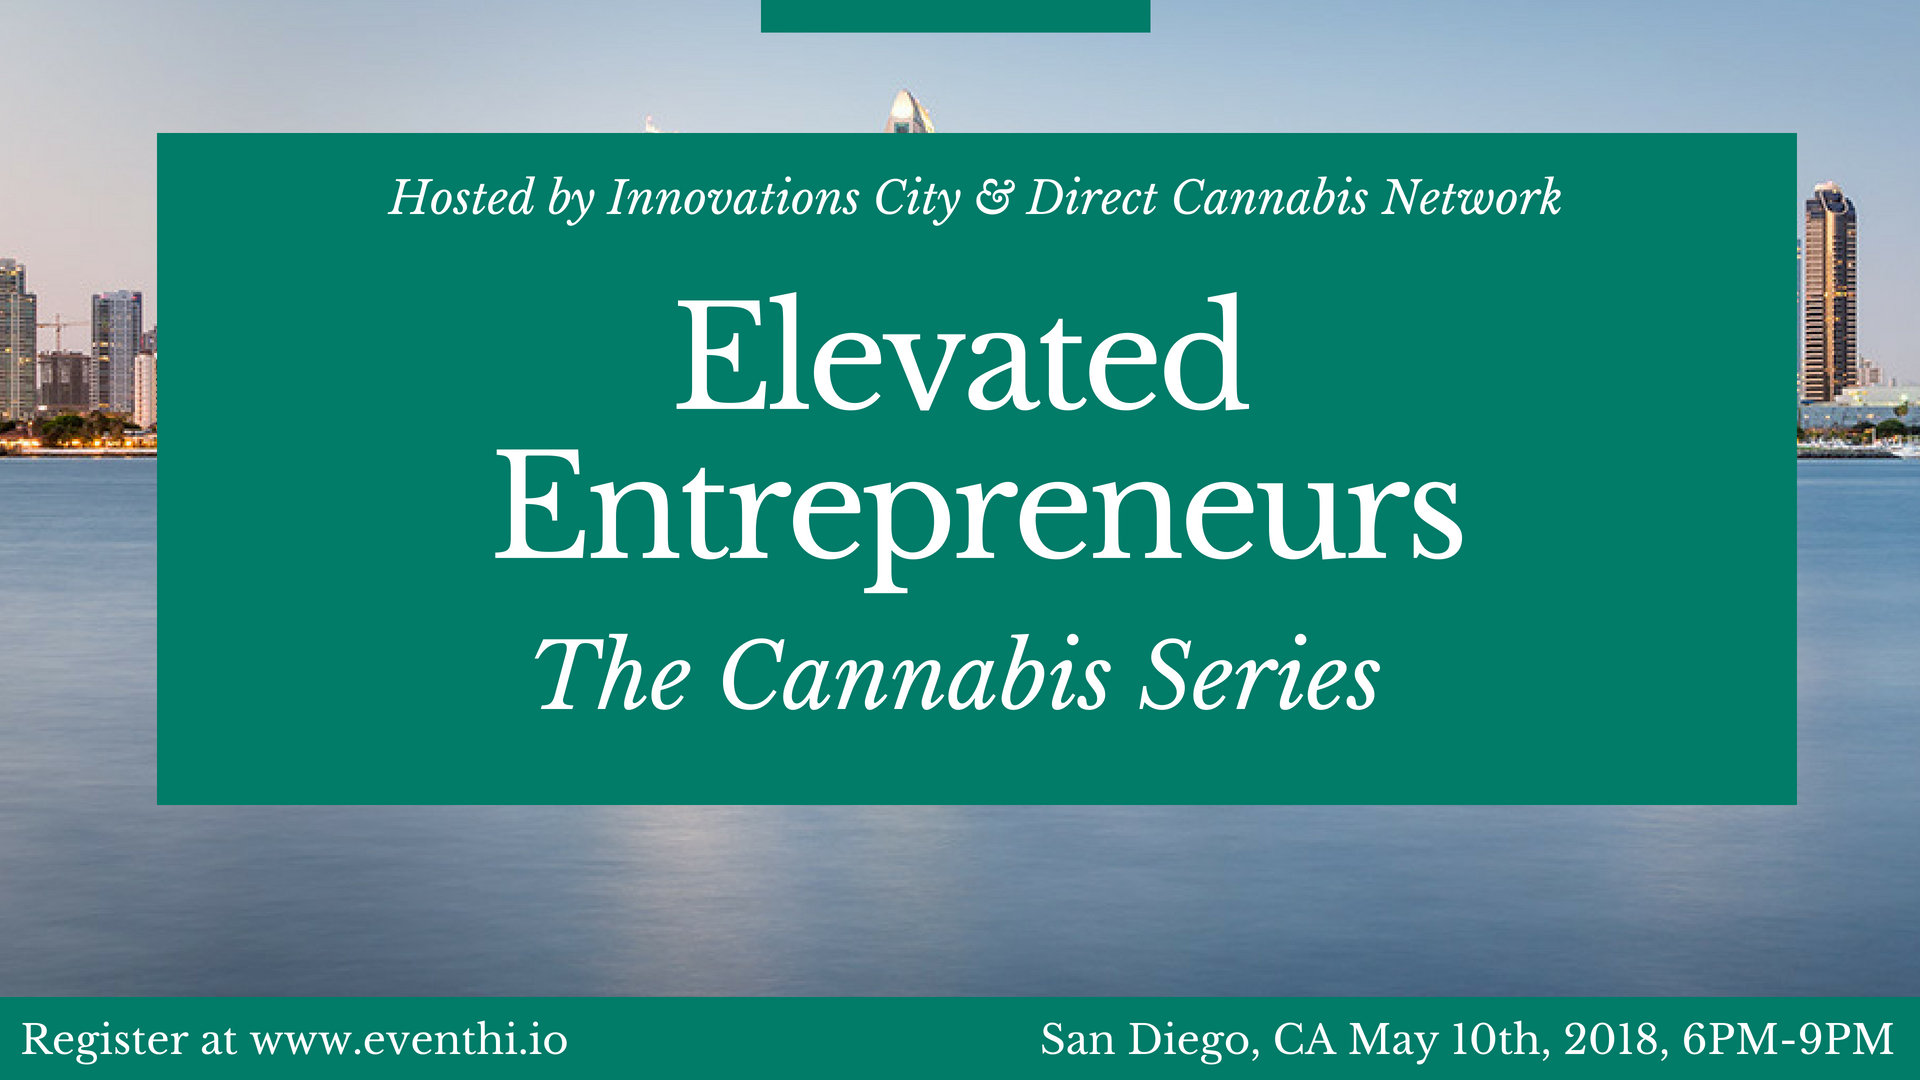 Elevated Entrepreneurs: The Cannabis Series